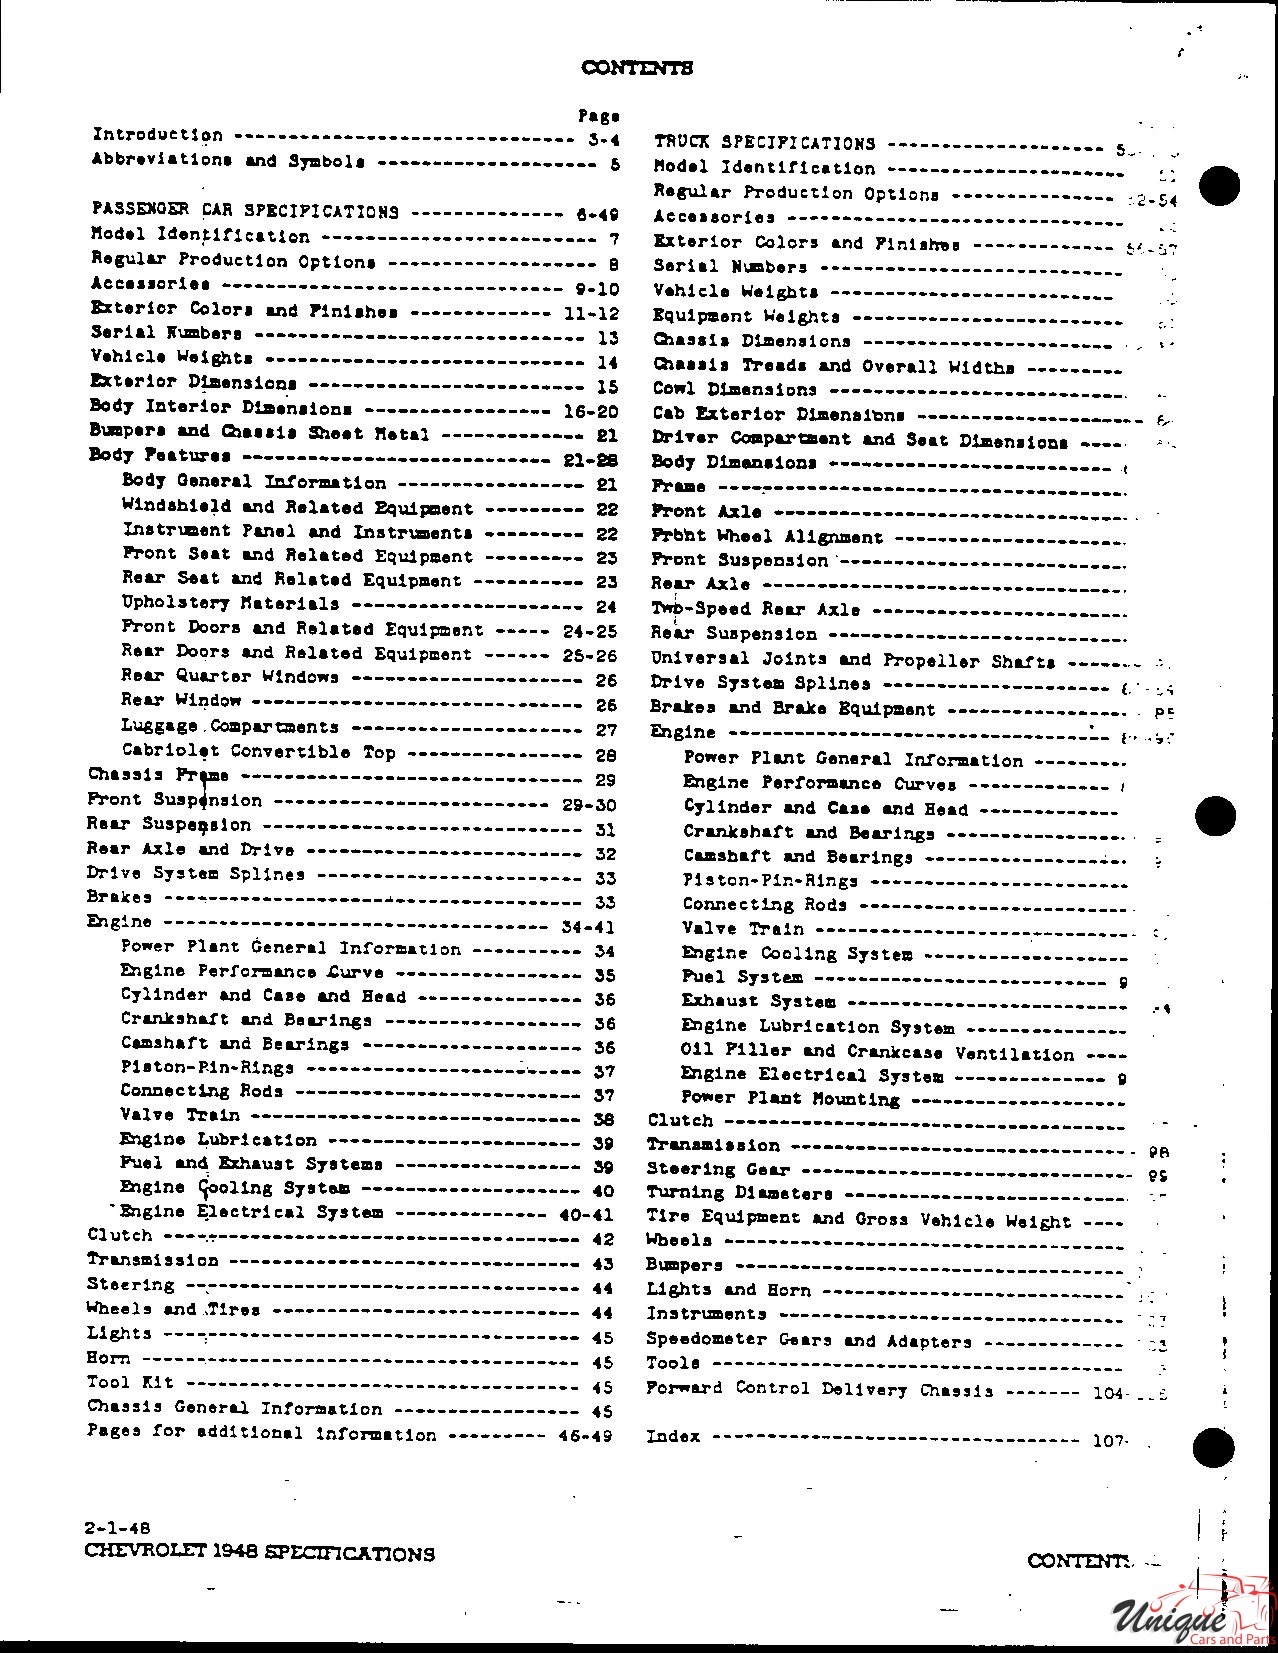 1948 Chevrolet Specifications Page 1